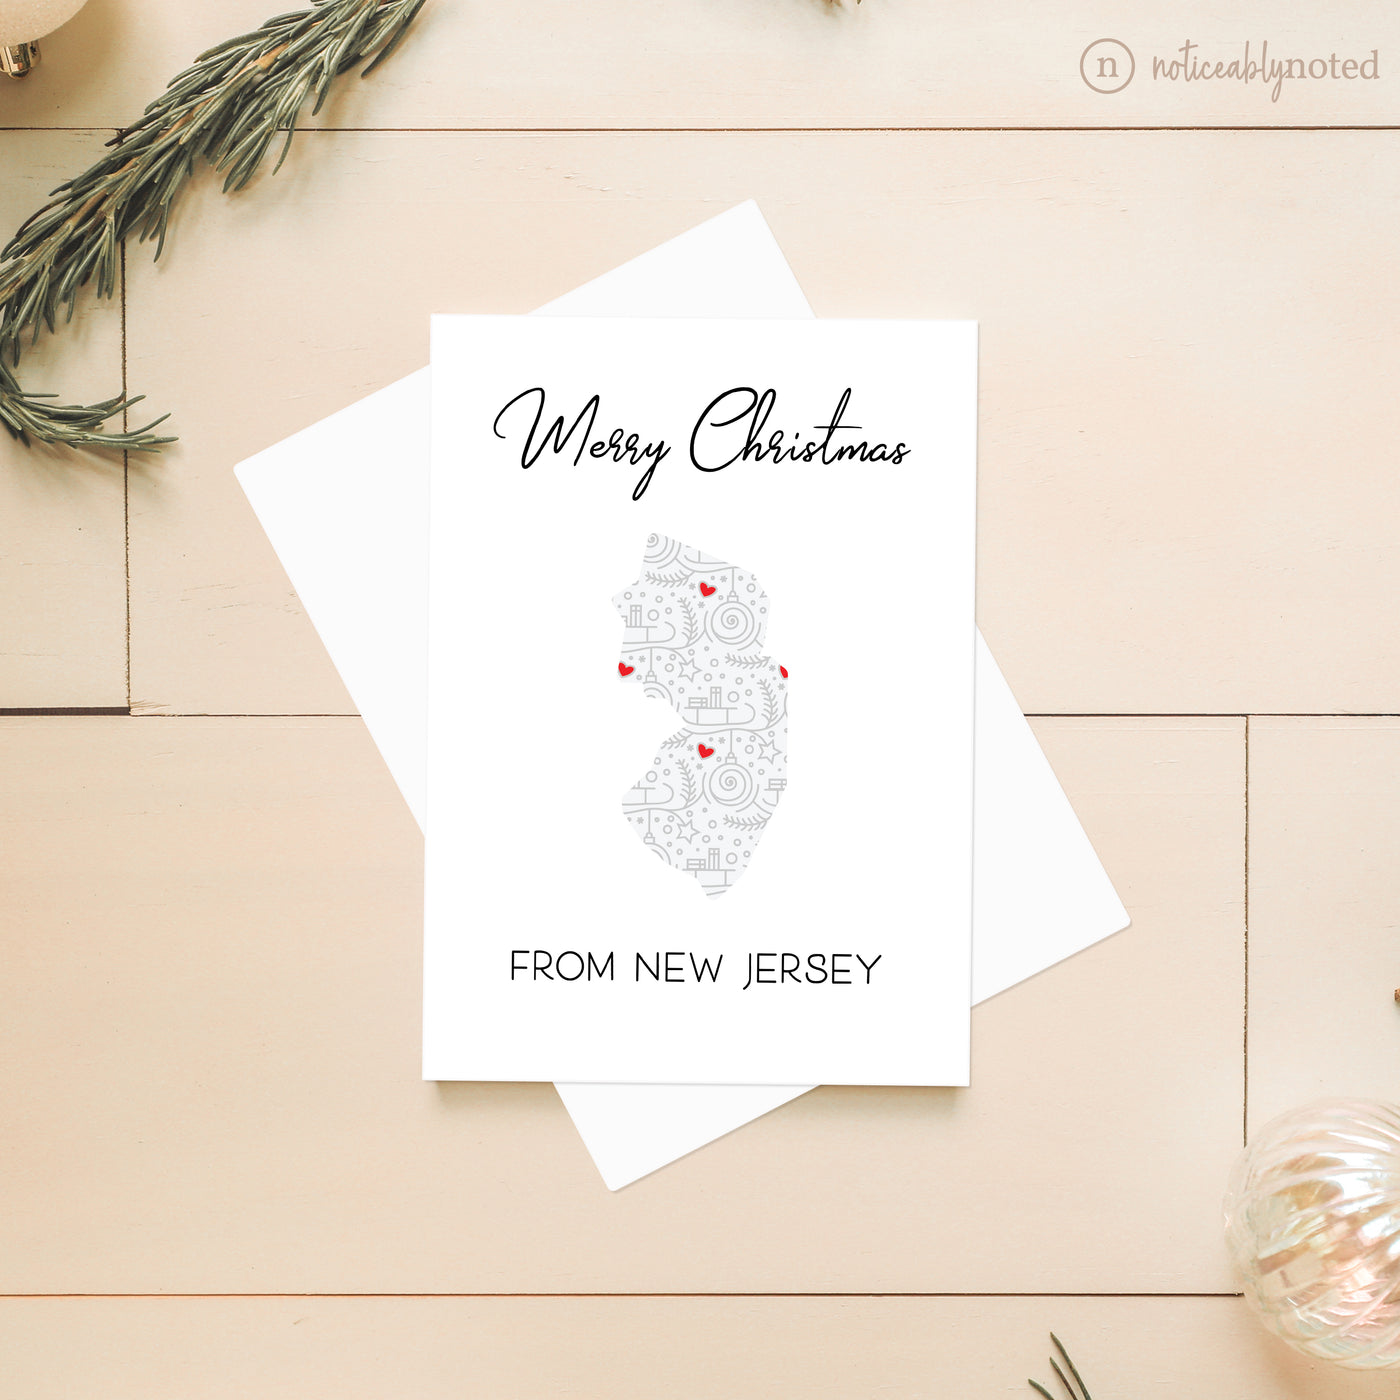 New Jersey Christmas Cards | Noticeably Noted